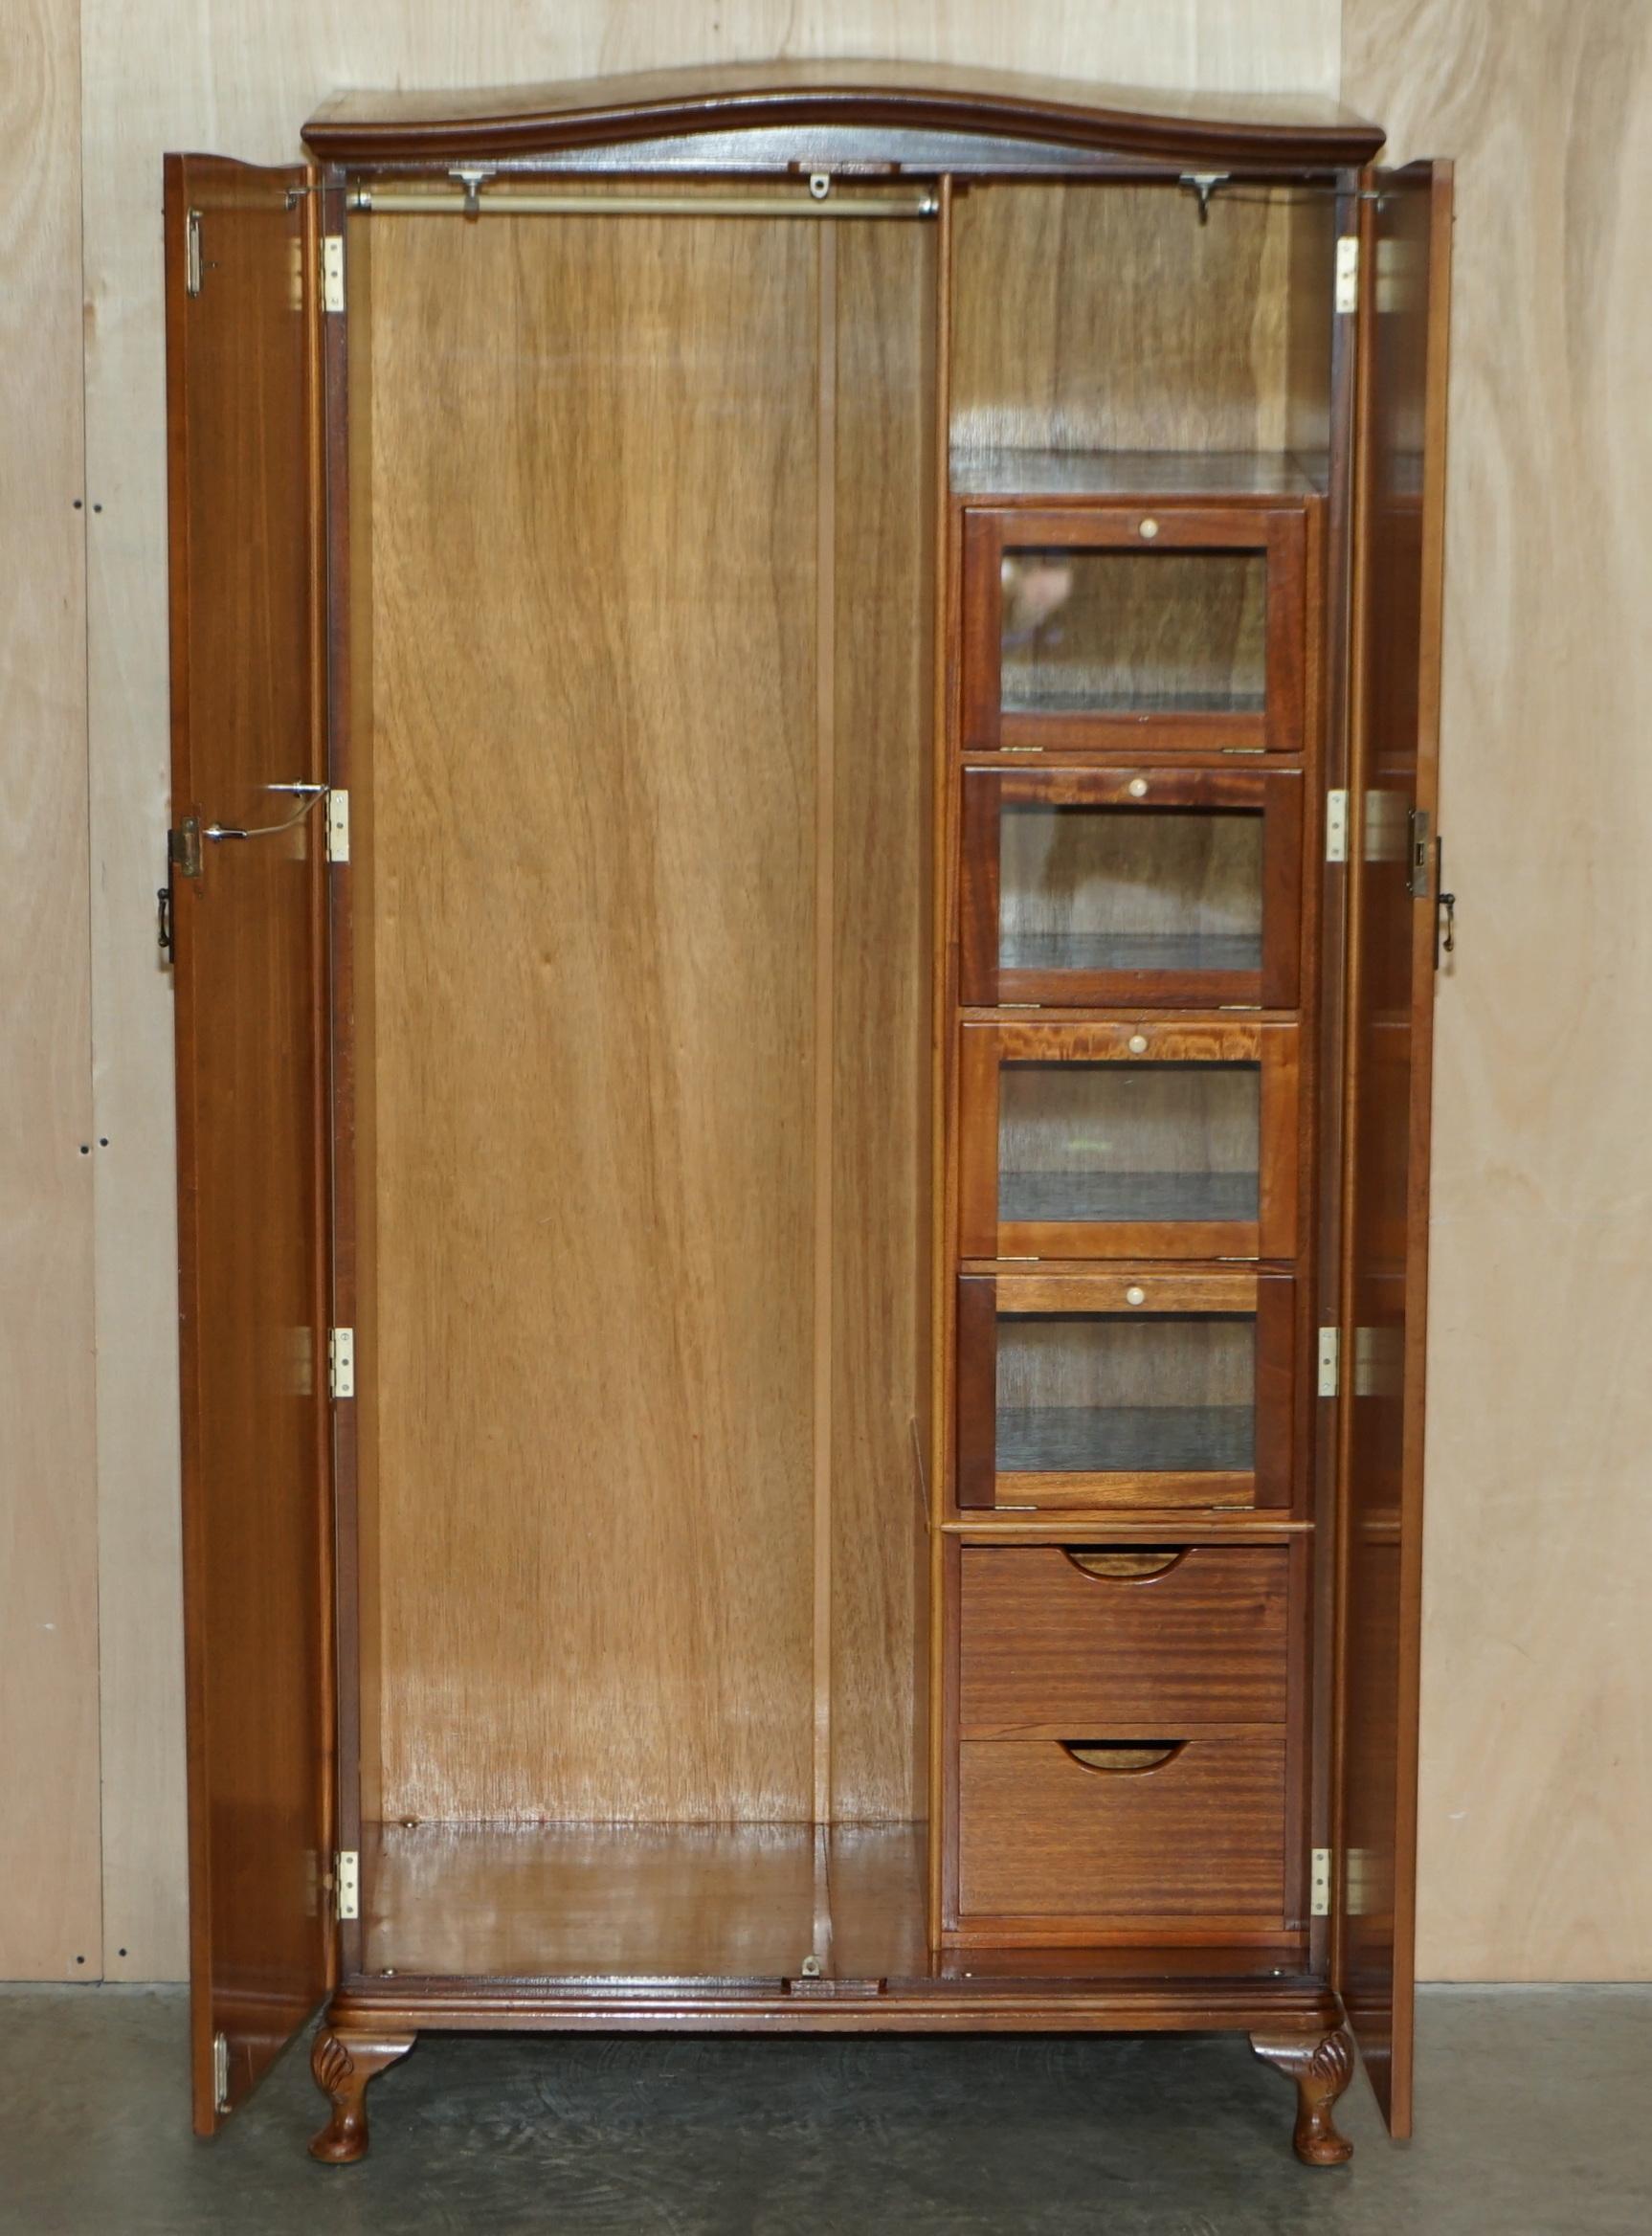 Antique Art Deco Burr Walnut Wardrobe with Built in Cubicles for Folded Clothes 10